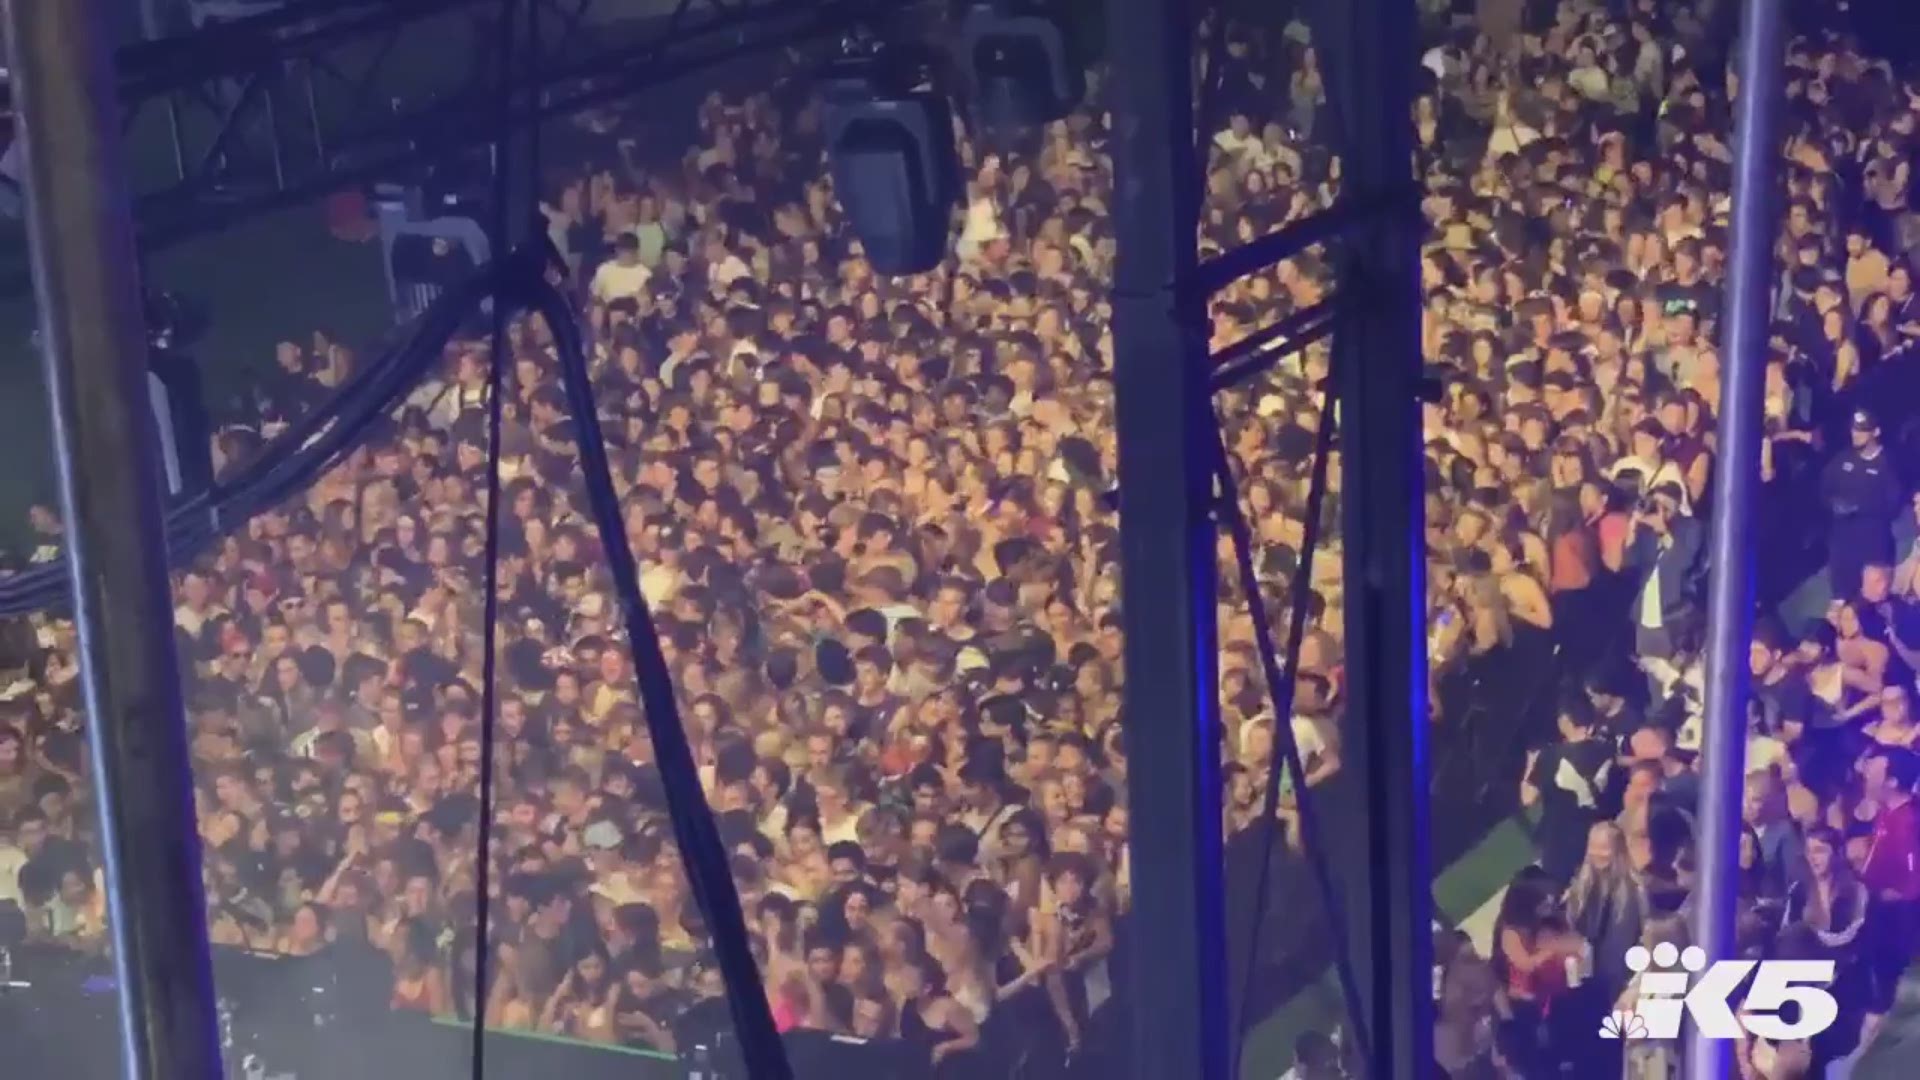 Cell phone footage from Cindy Raley shows the chaos as a barrier collapsed during a performance at Seattle's Bumbershoot music festival on Saturday, August 31. Four people were taken to the hospital and dozens more were evaluated for injuries at the venue. No one was critically hurt.